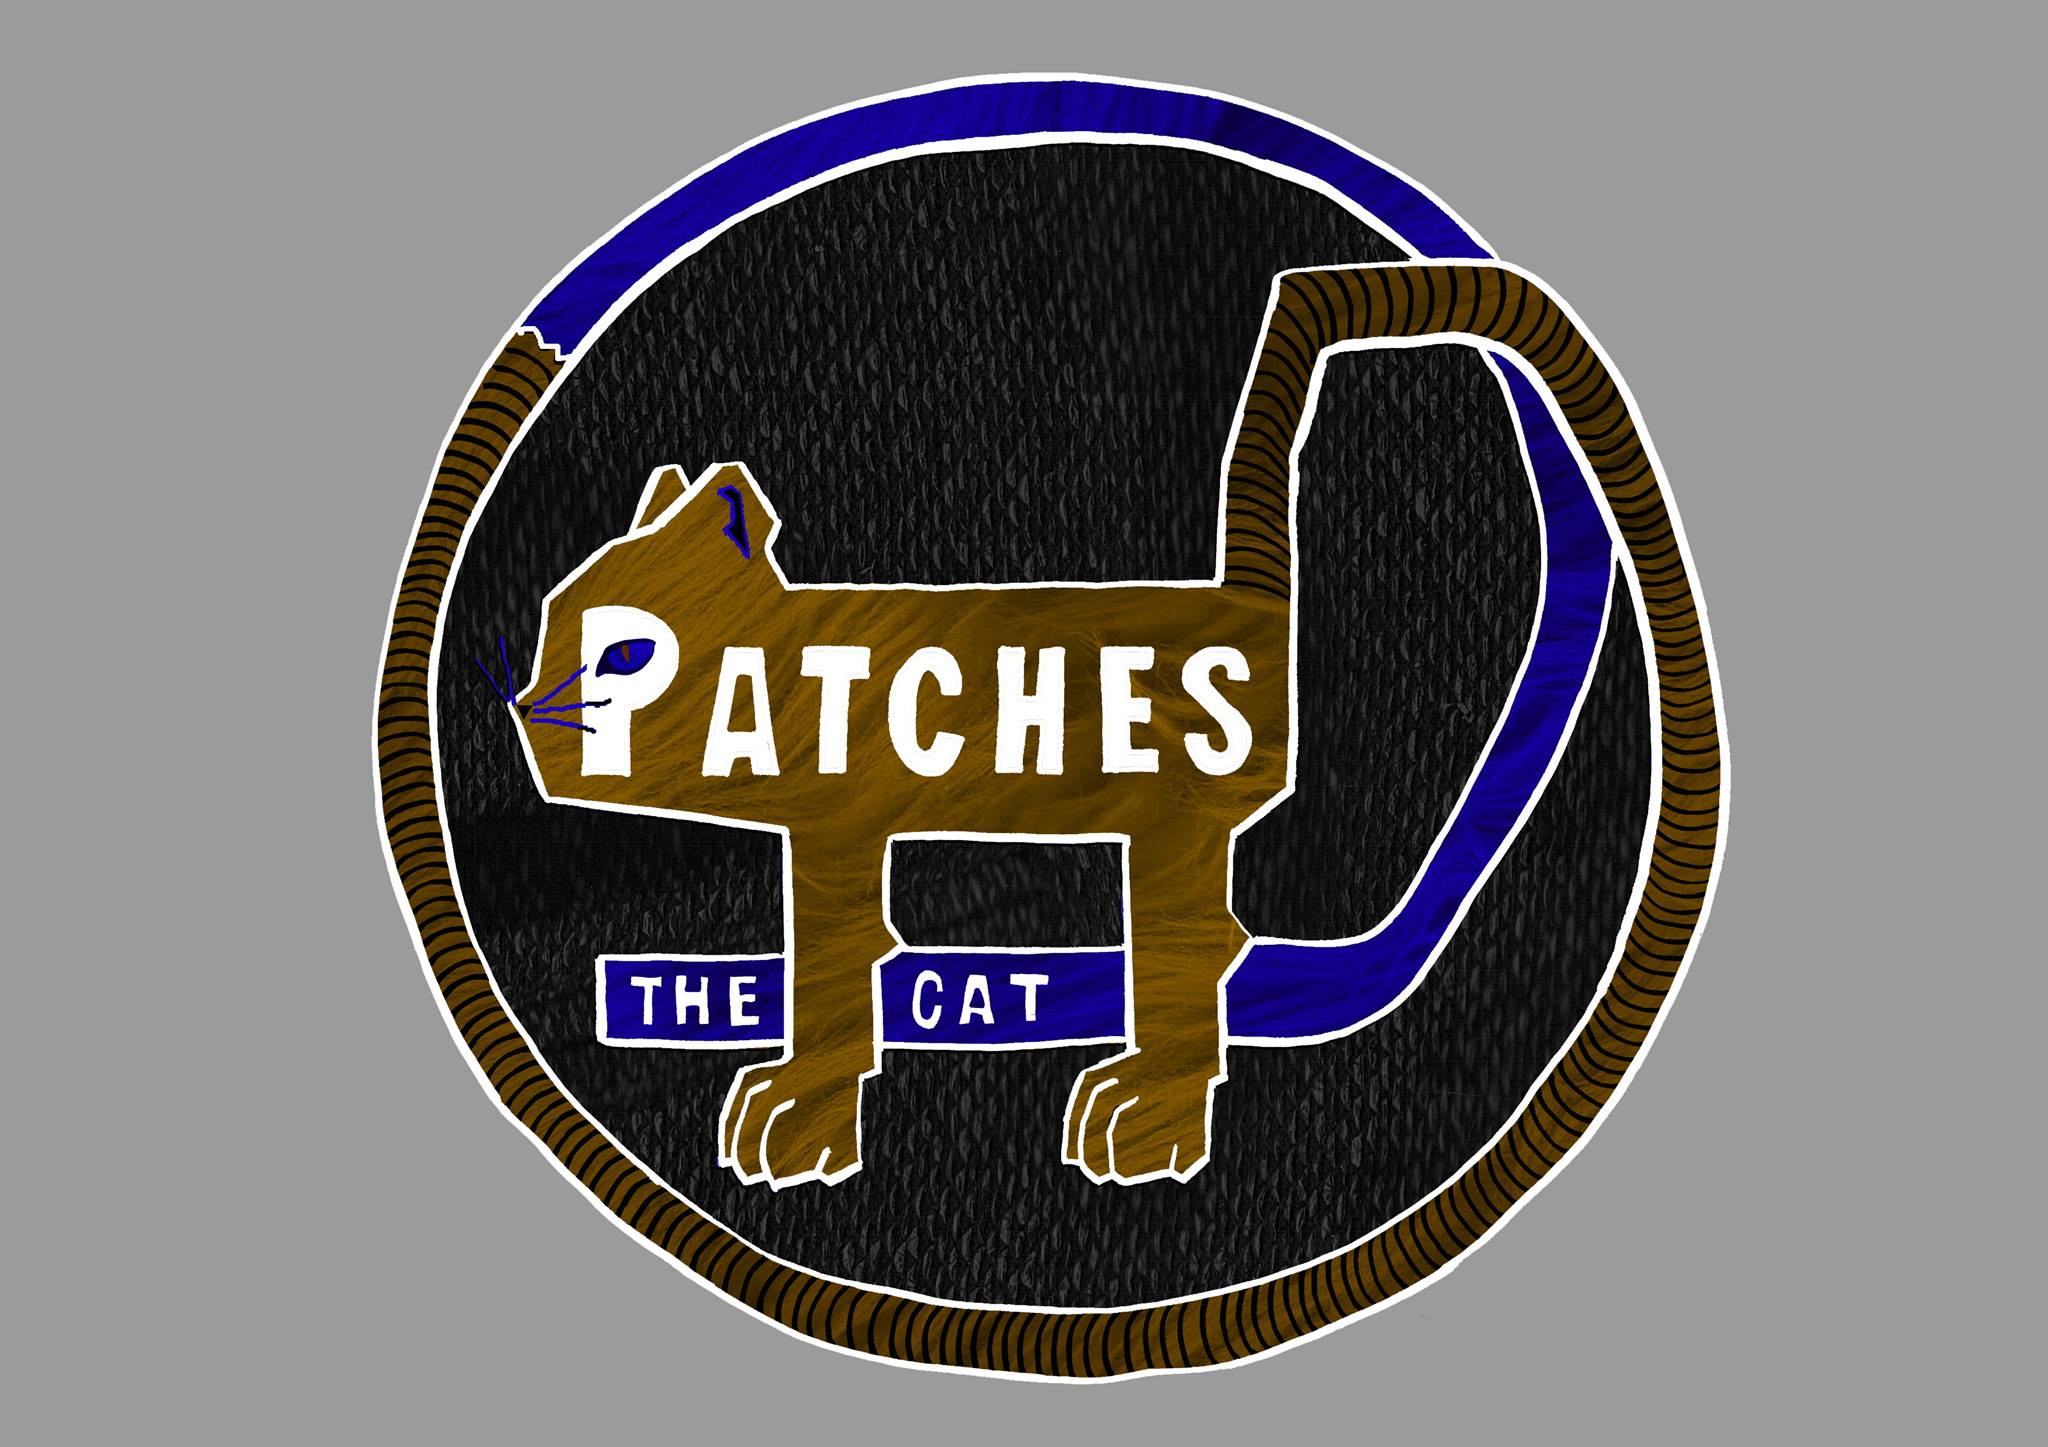 Patches the Cat